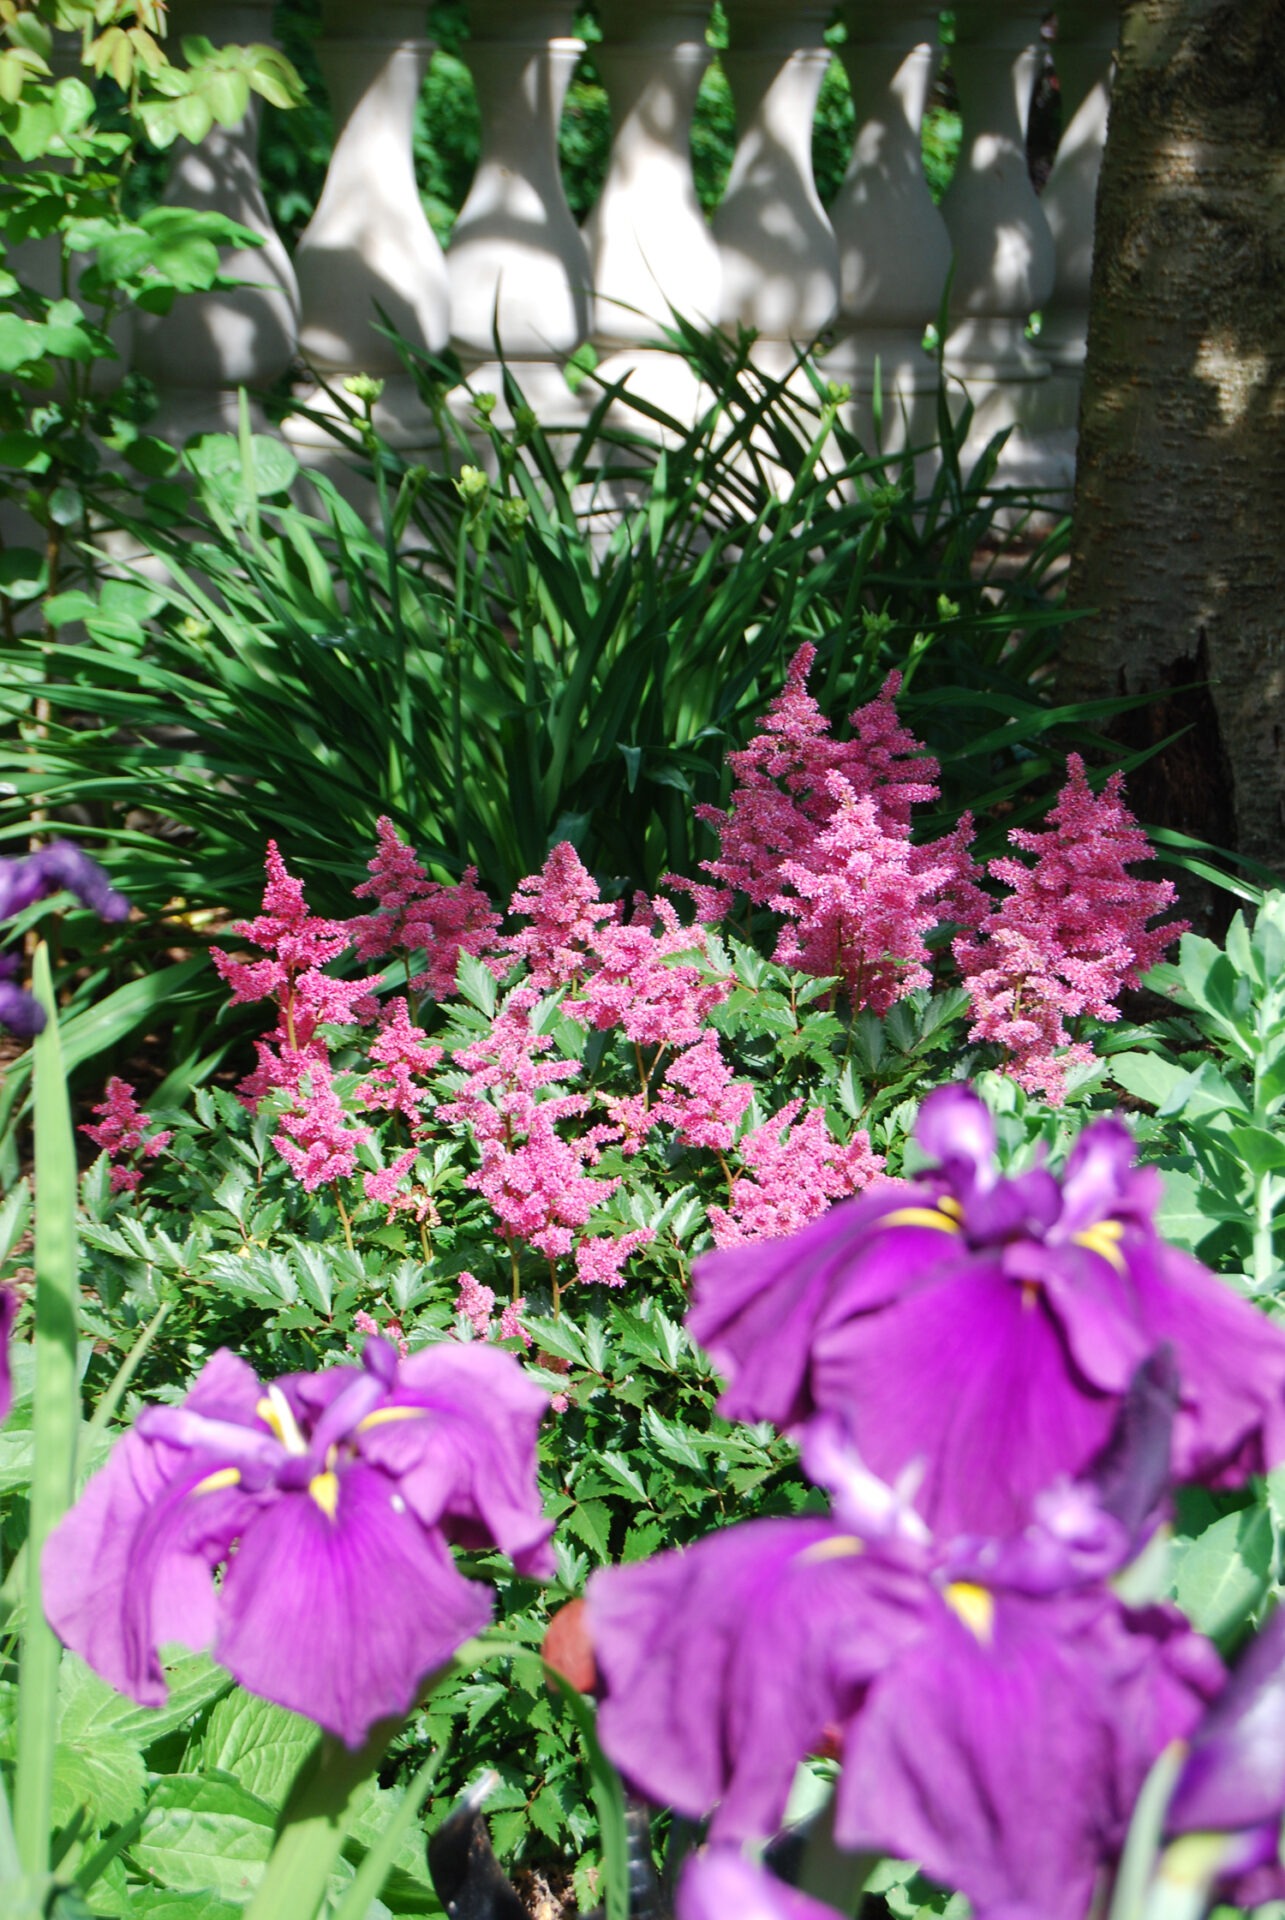 A garden with vibrant purple irises in the foreground and pink astilbe flowers midground. Sunlight filters through a white balustrade onto green foliage.